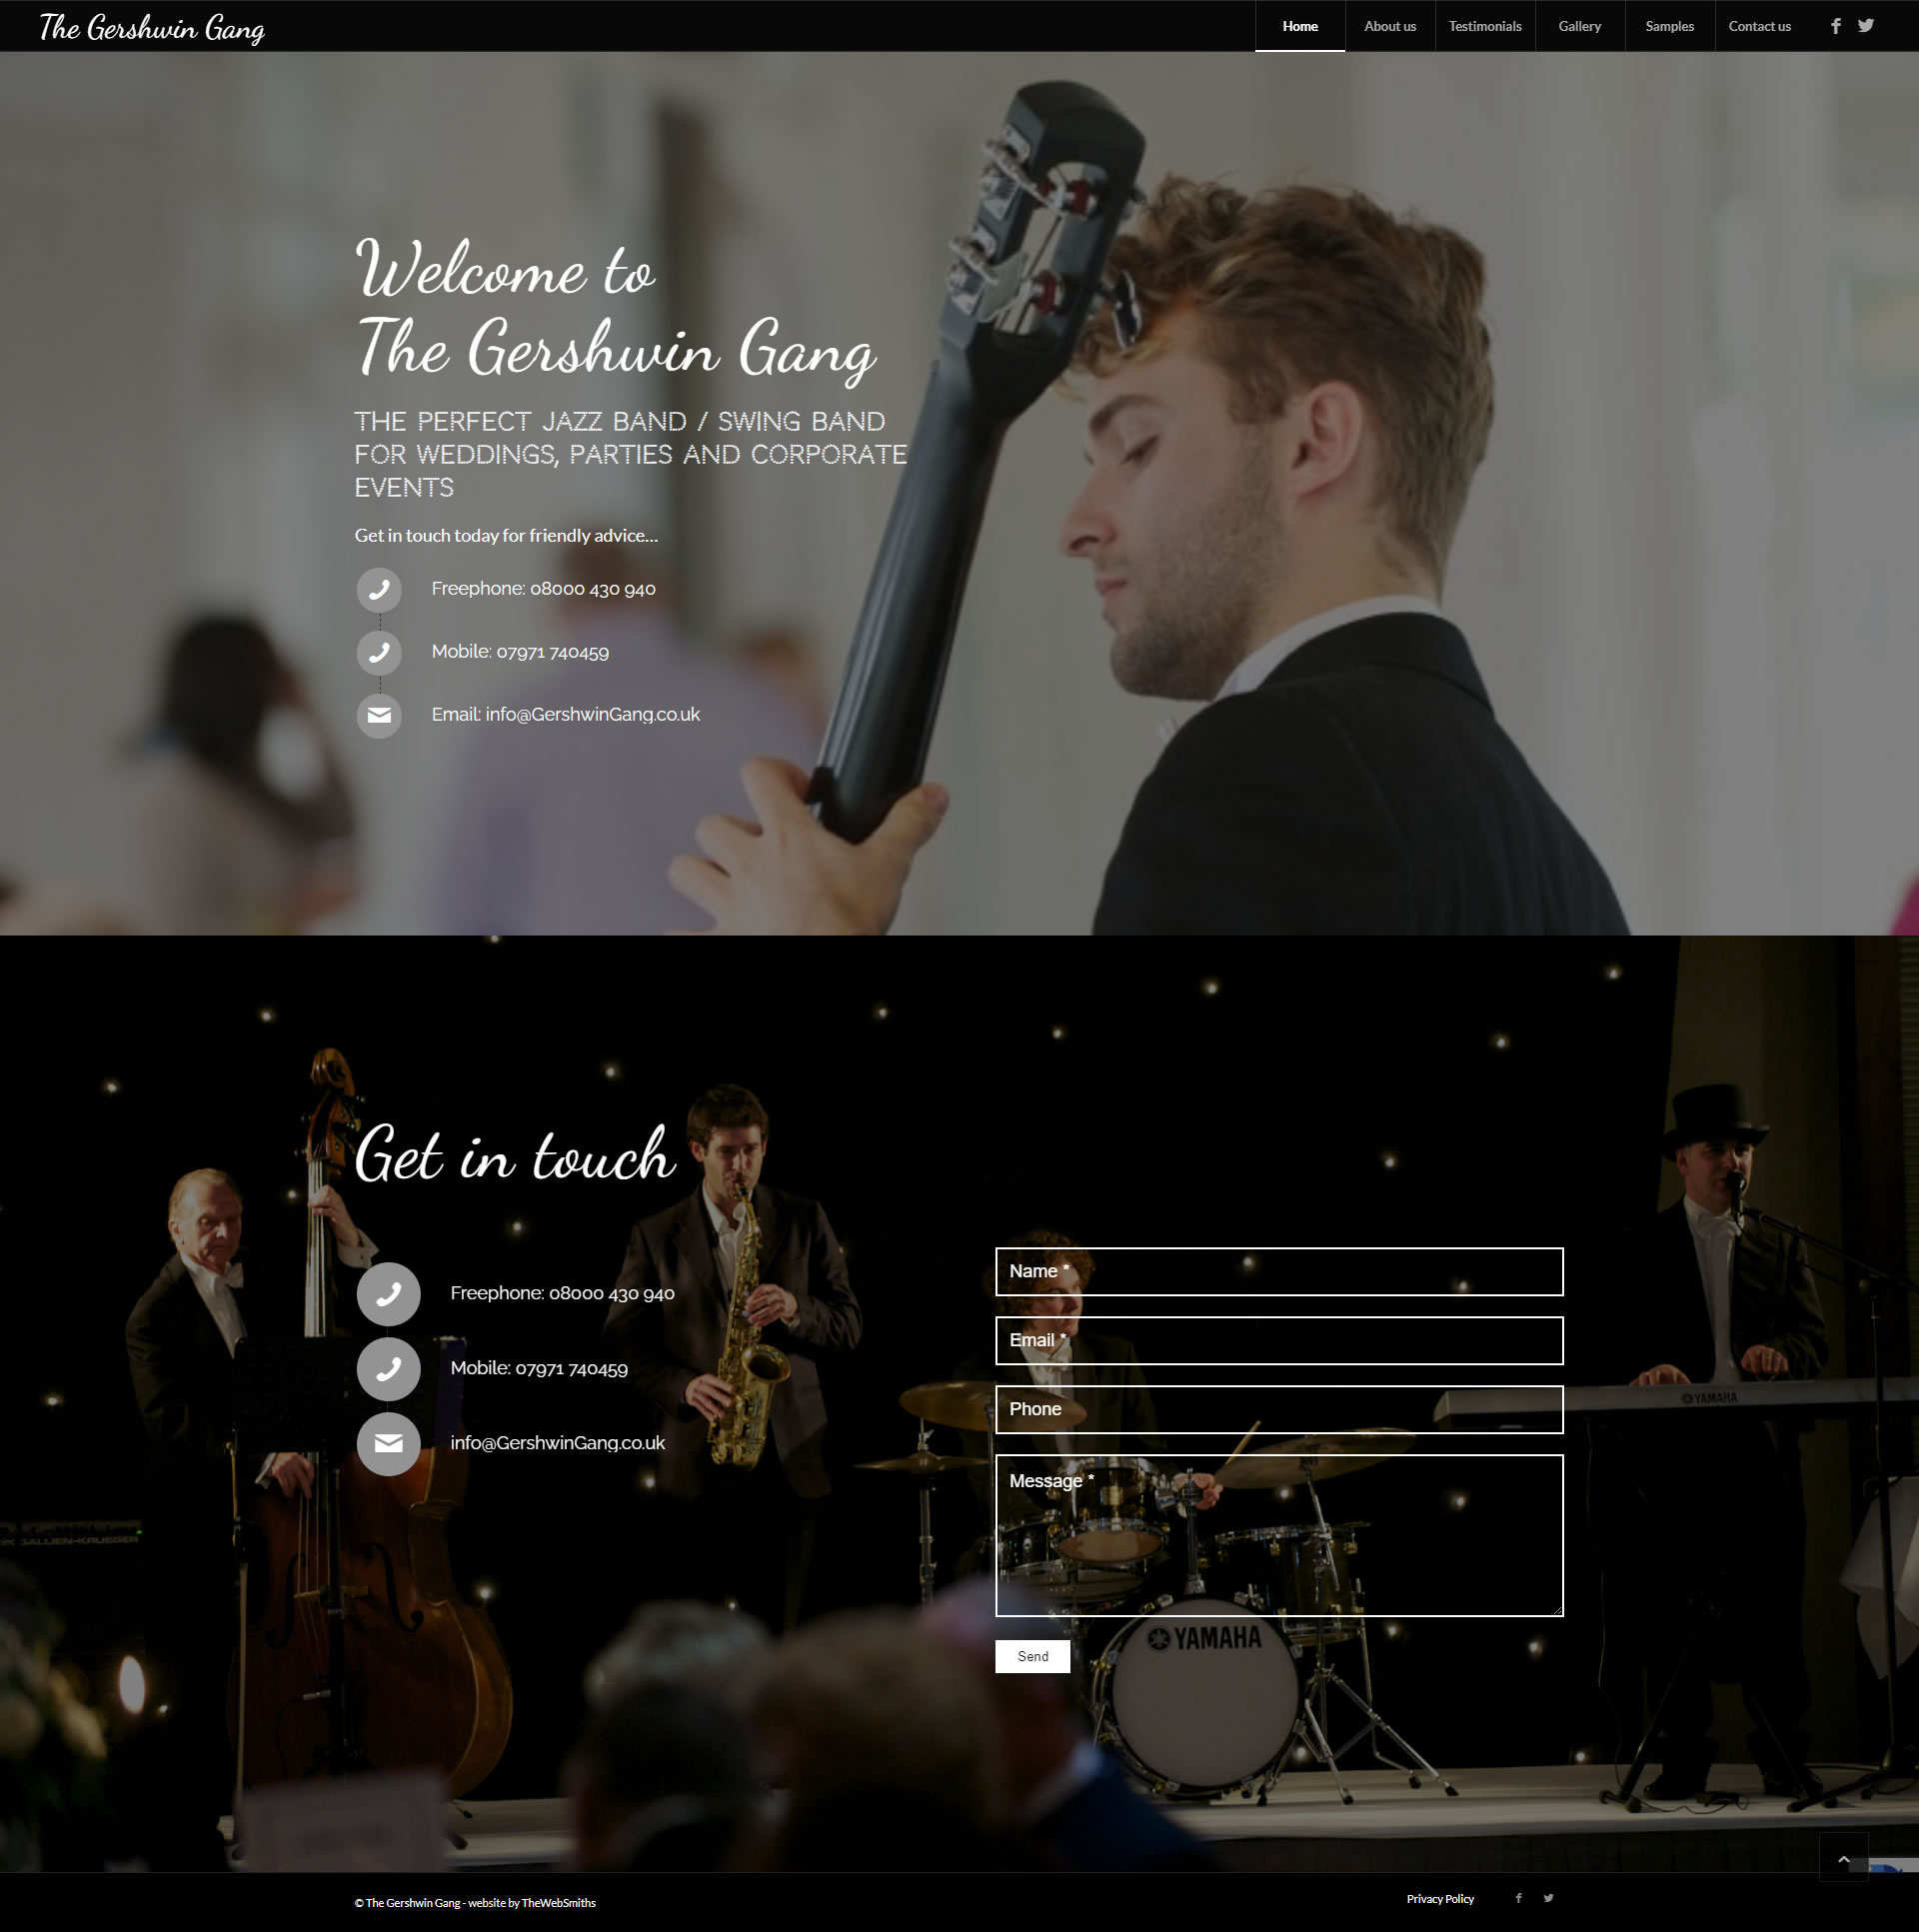 A new website for The Gershwin Gang